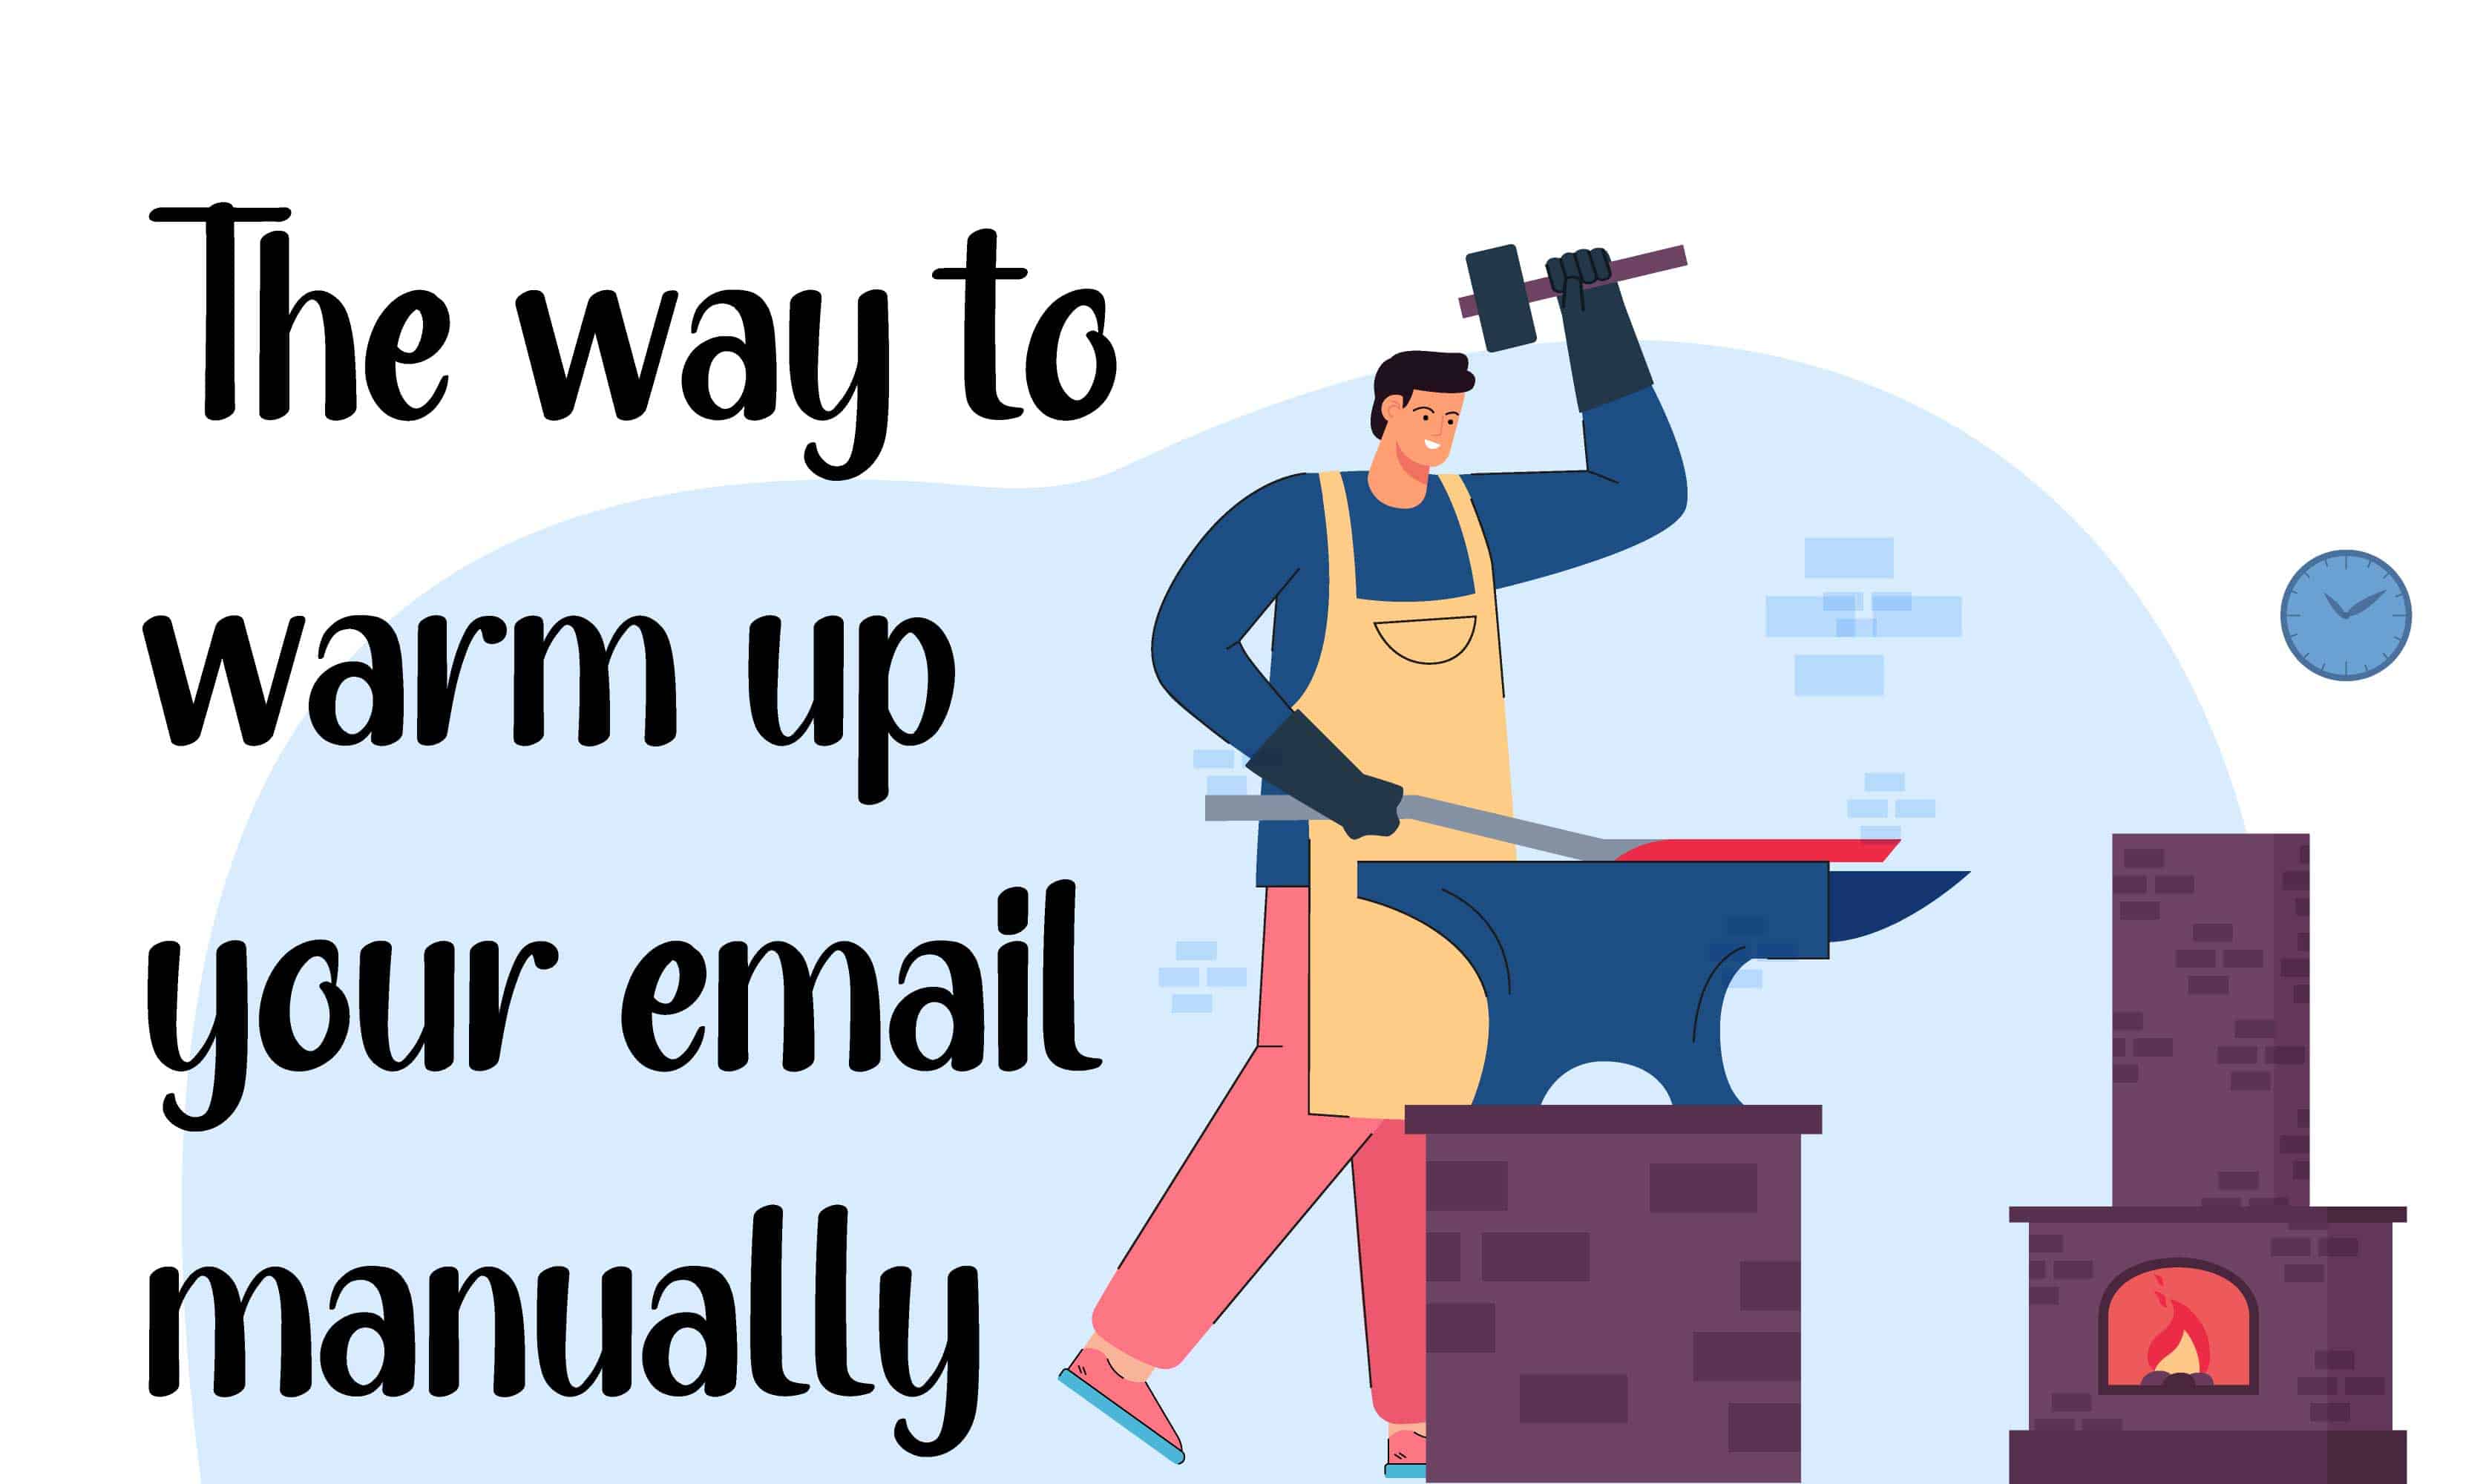 The way to warm up your email manually